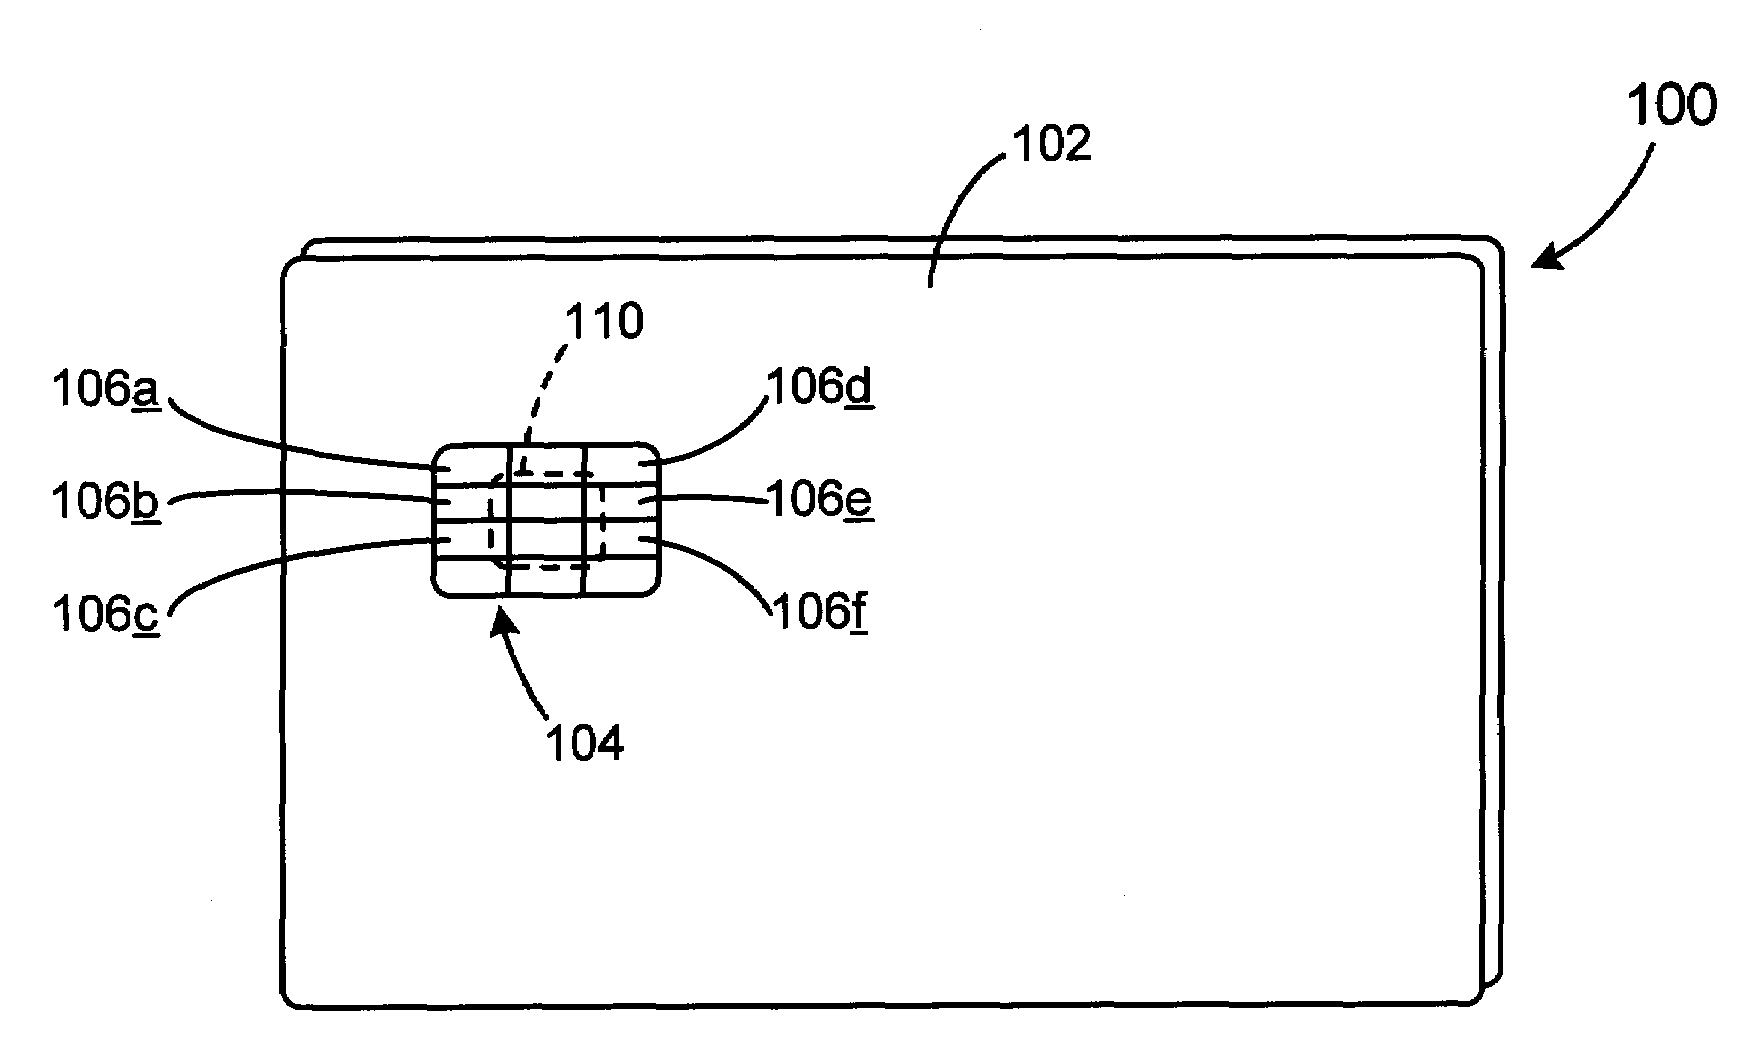 Methods and apparatus for a secure proximity integrated circuit card transactions